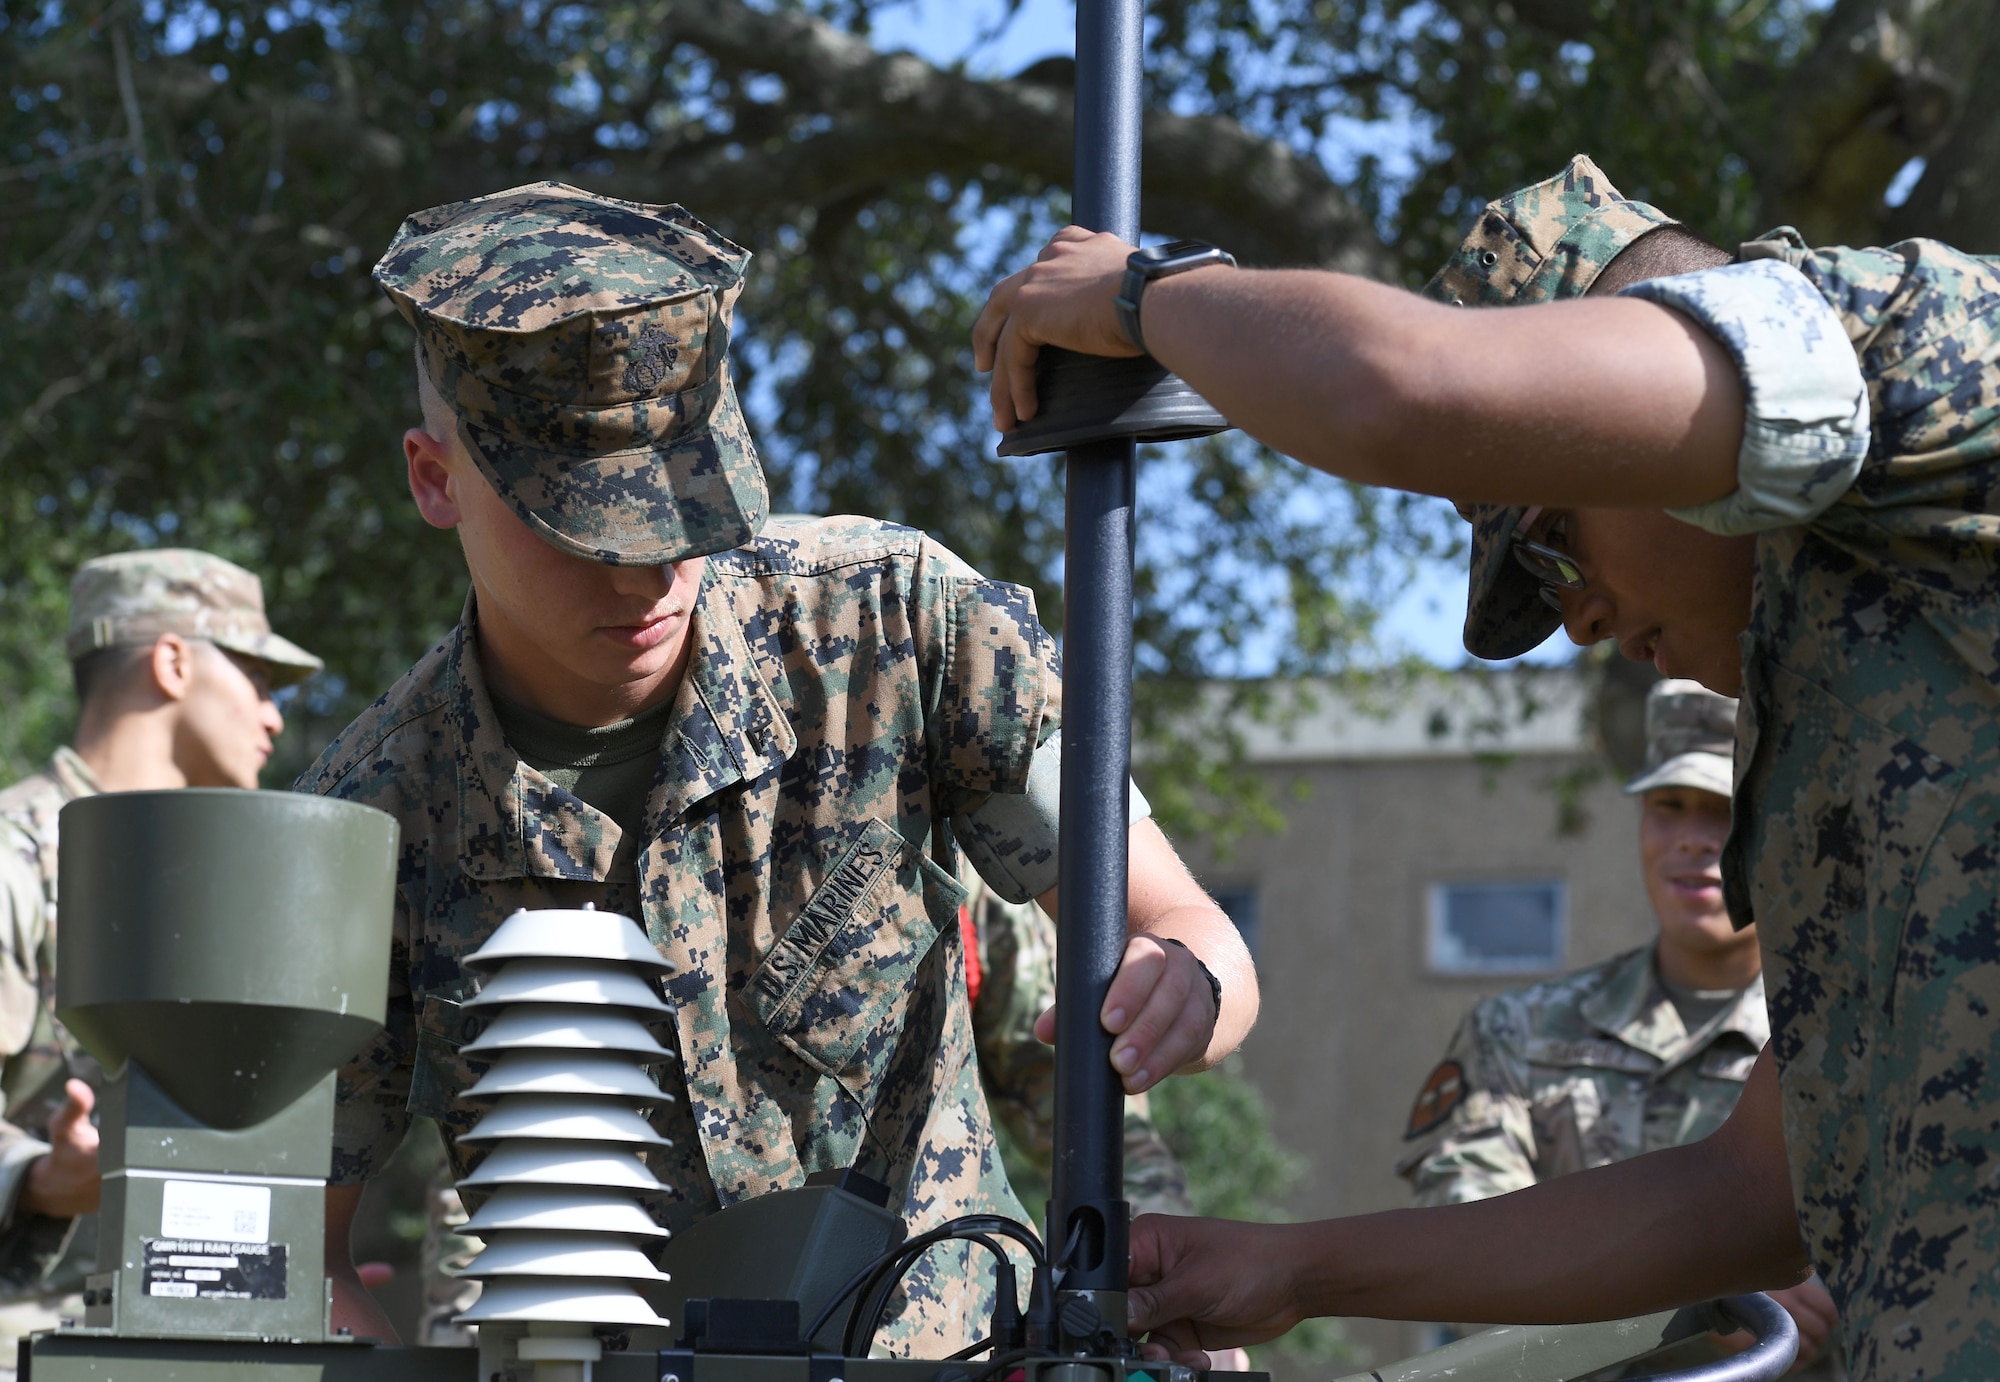 U.S. Marines Lance Cpl. Zachary Quellette and Pfc. Diego Morales Cabrera, Keesler Marine Detachment students, assemble a TMQ-53 weather sensor outside of the Joint Weather Training Facility at Keesler Air Force Base, Mississippi, July 21, 2022. The weather apprentice course, which graduated 650 students this past year, takes 151 academic days to complete. Approximately 7,400 students go through the 335th TRS's 13 Air Force Specialty Codes each year. (U.S. Air Force photo by Kemberly Groue)